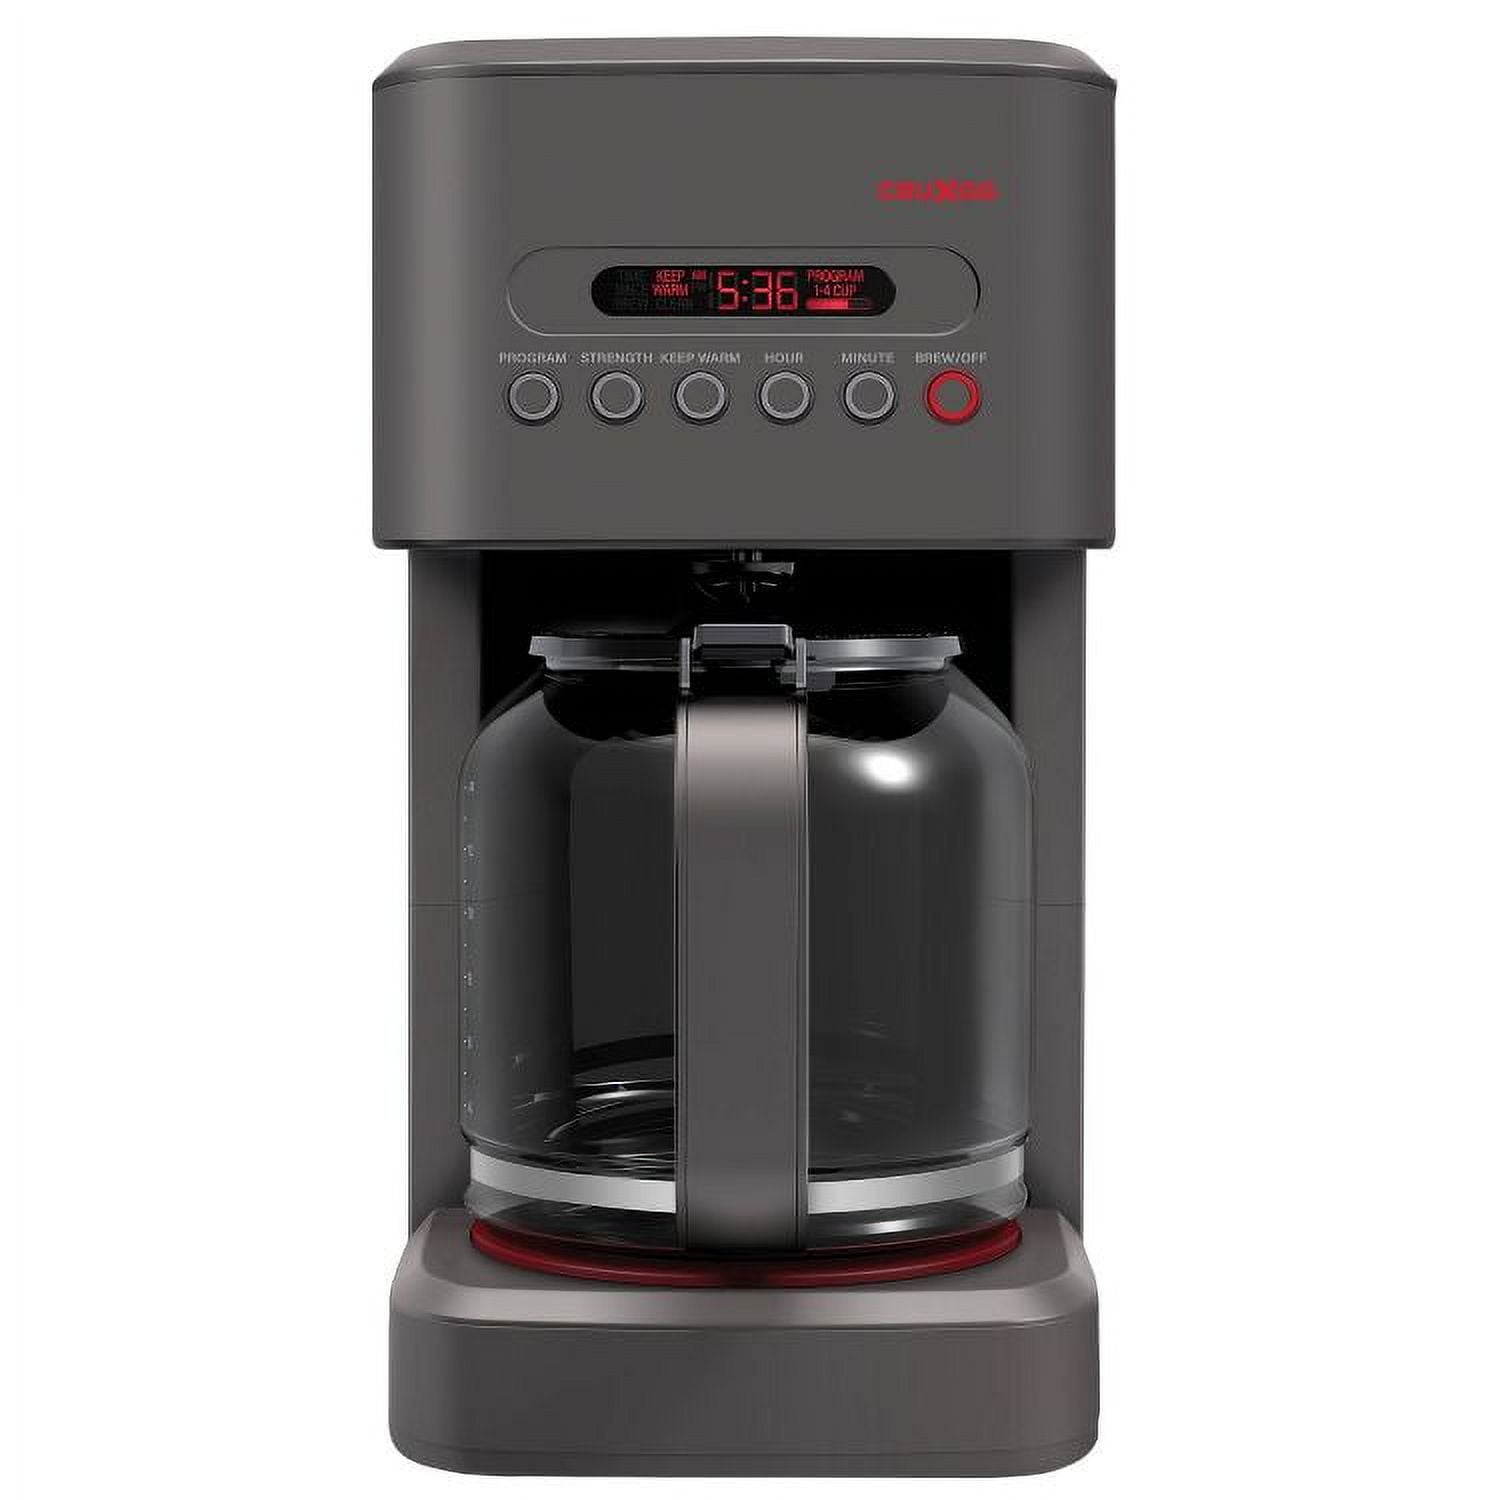 CRUXGG Fully Programmable Settings Coffee Maker with Customizable